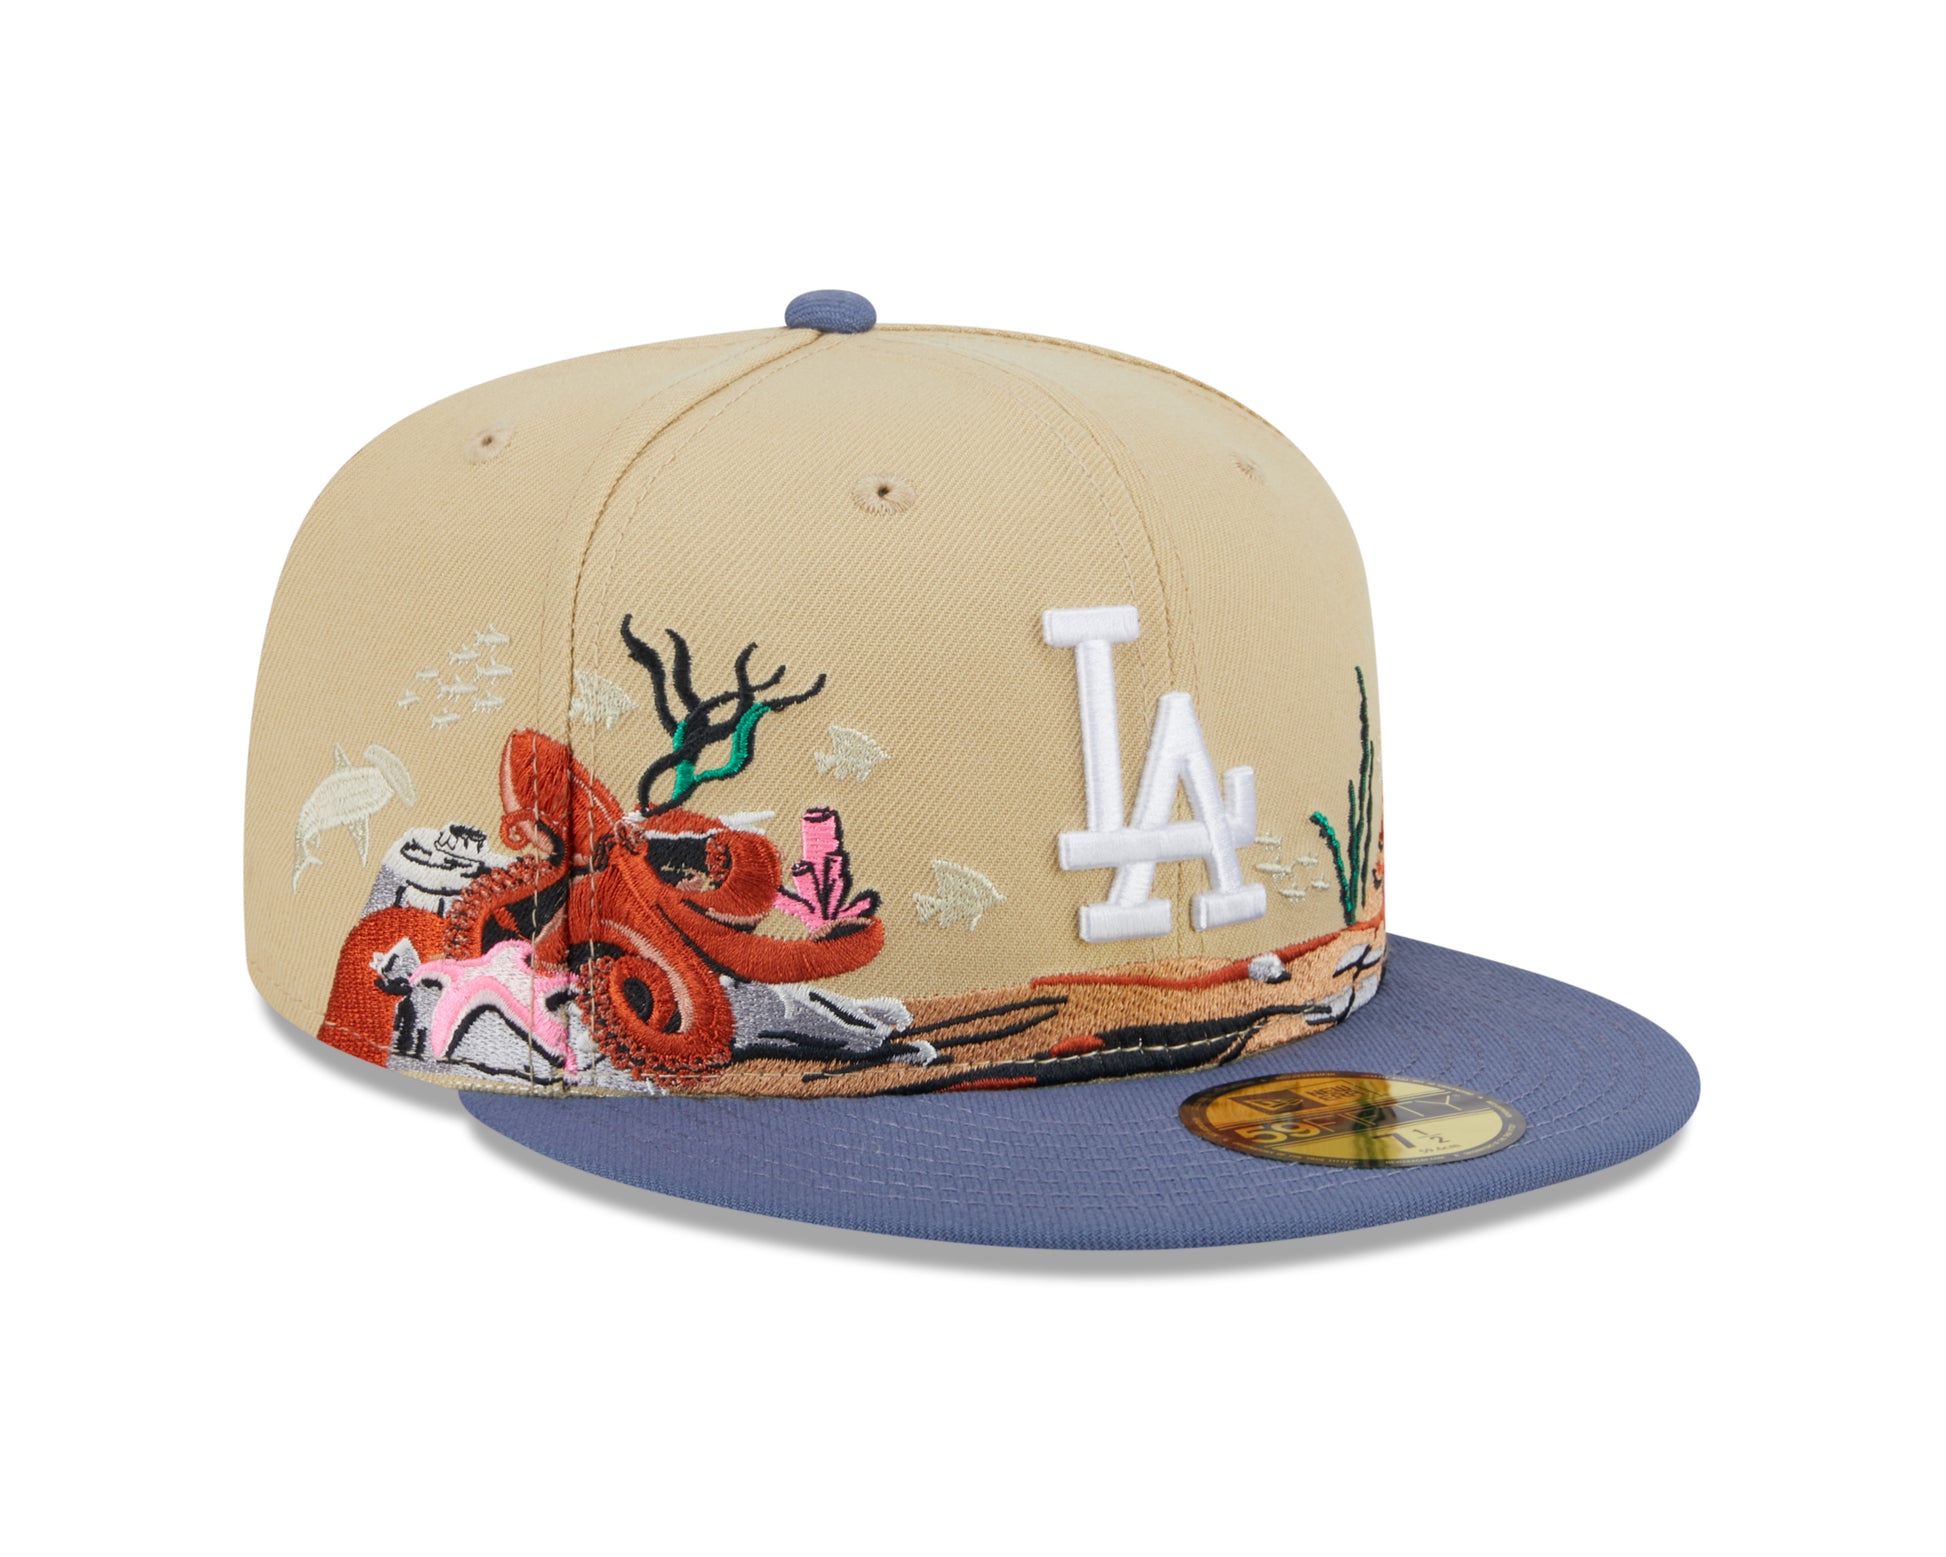 New Era - 59Fifty Fitted Cap TEAM LANDSCAPE - Los Angeles Dodgers - VGD - Headz Up 